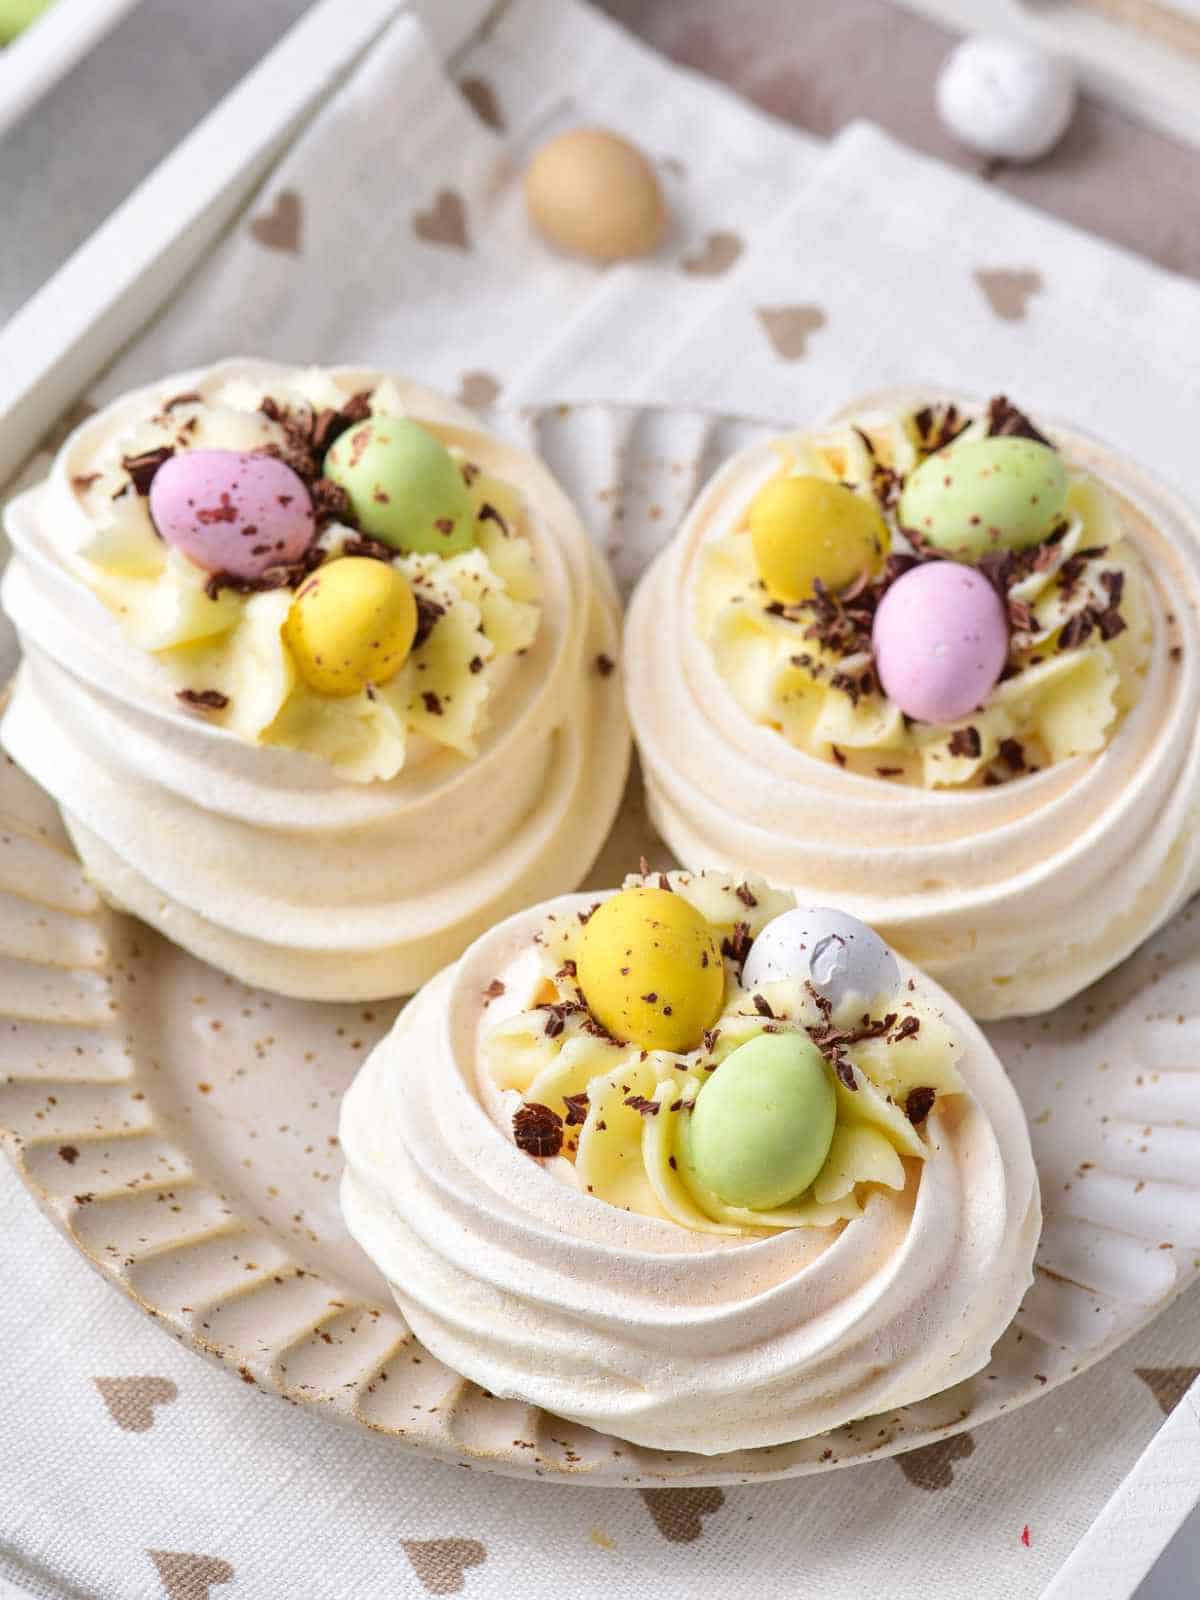 Filled mini meringue nests with cheesecake filling and Cadbury Mini eggs.